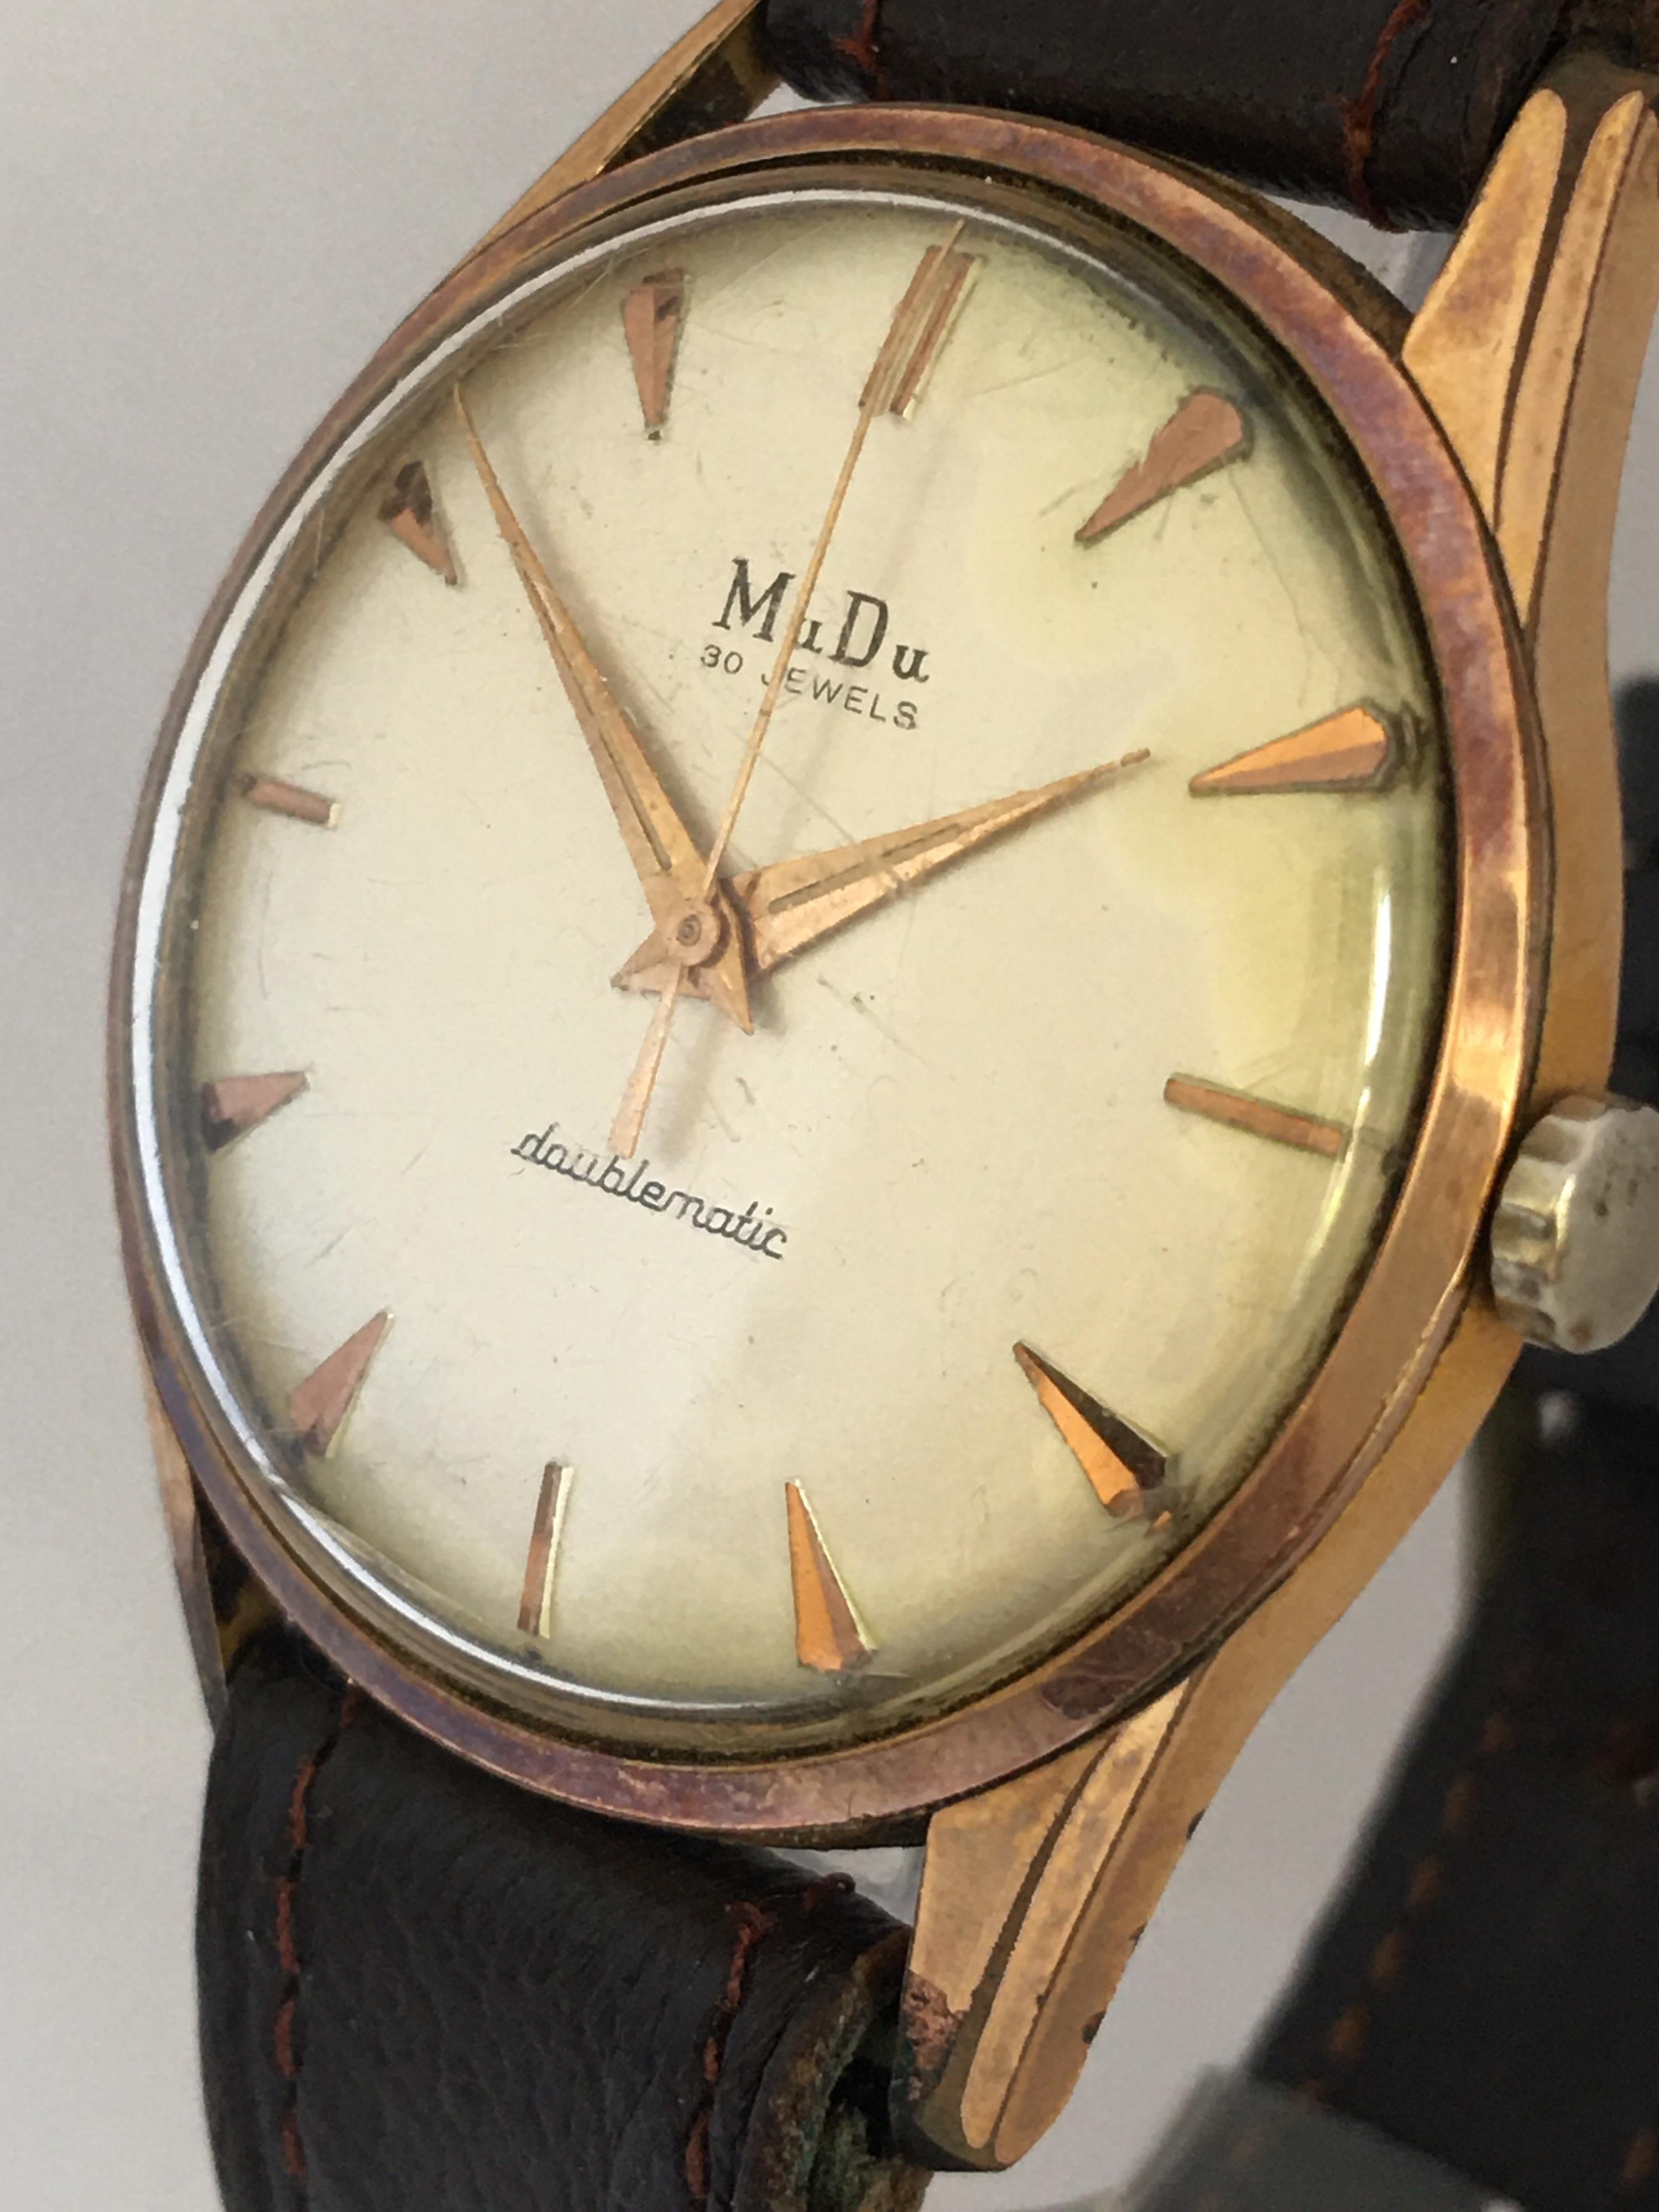 This charming pre-owned vintage gents automatic watch is working and it is running well. Visible signs of wear and ageing with a slight scratches on the watch glass and visible tiny crack on the glass as shown. The gold plated watch case shows some